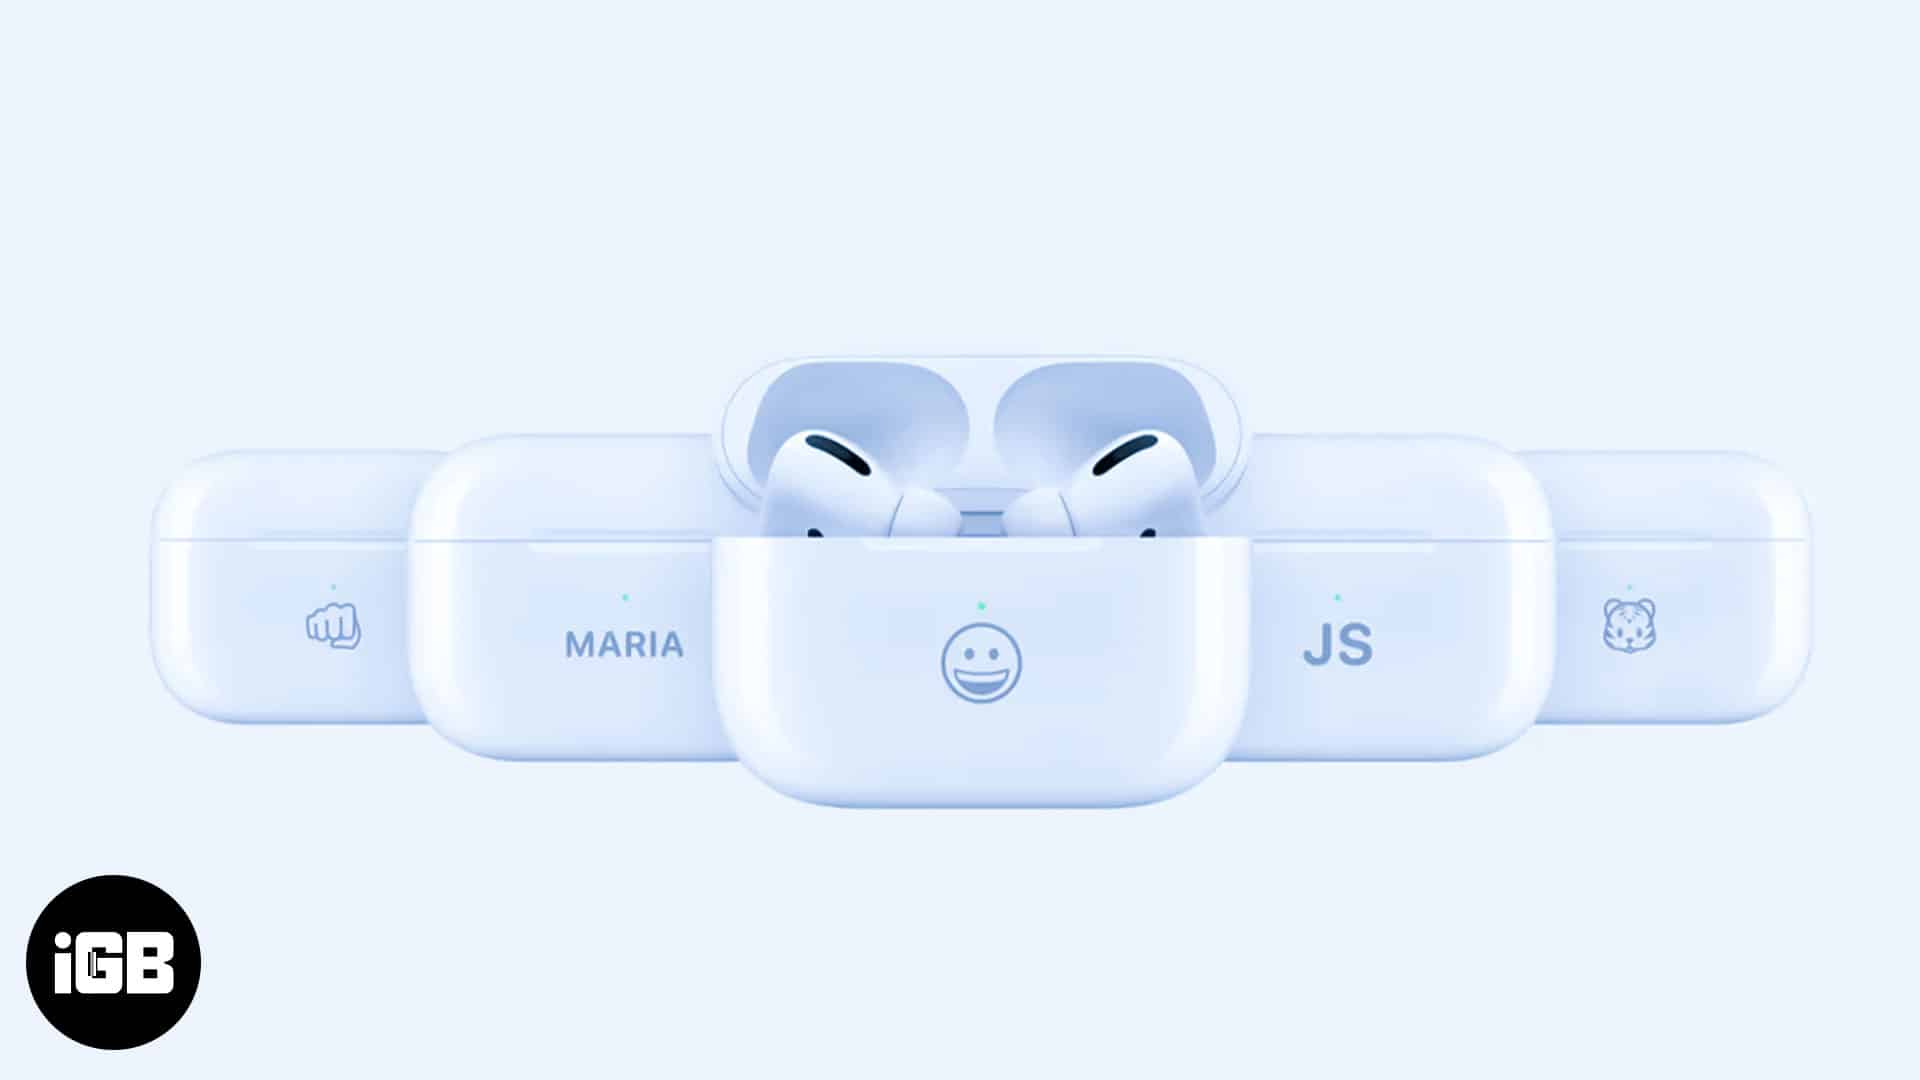 How to engrave an emoji or text on your airpods